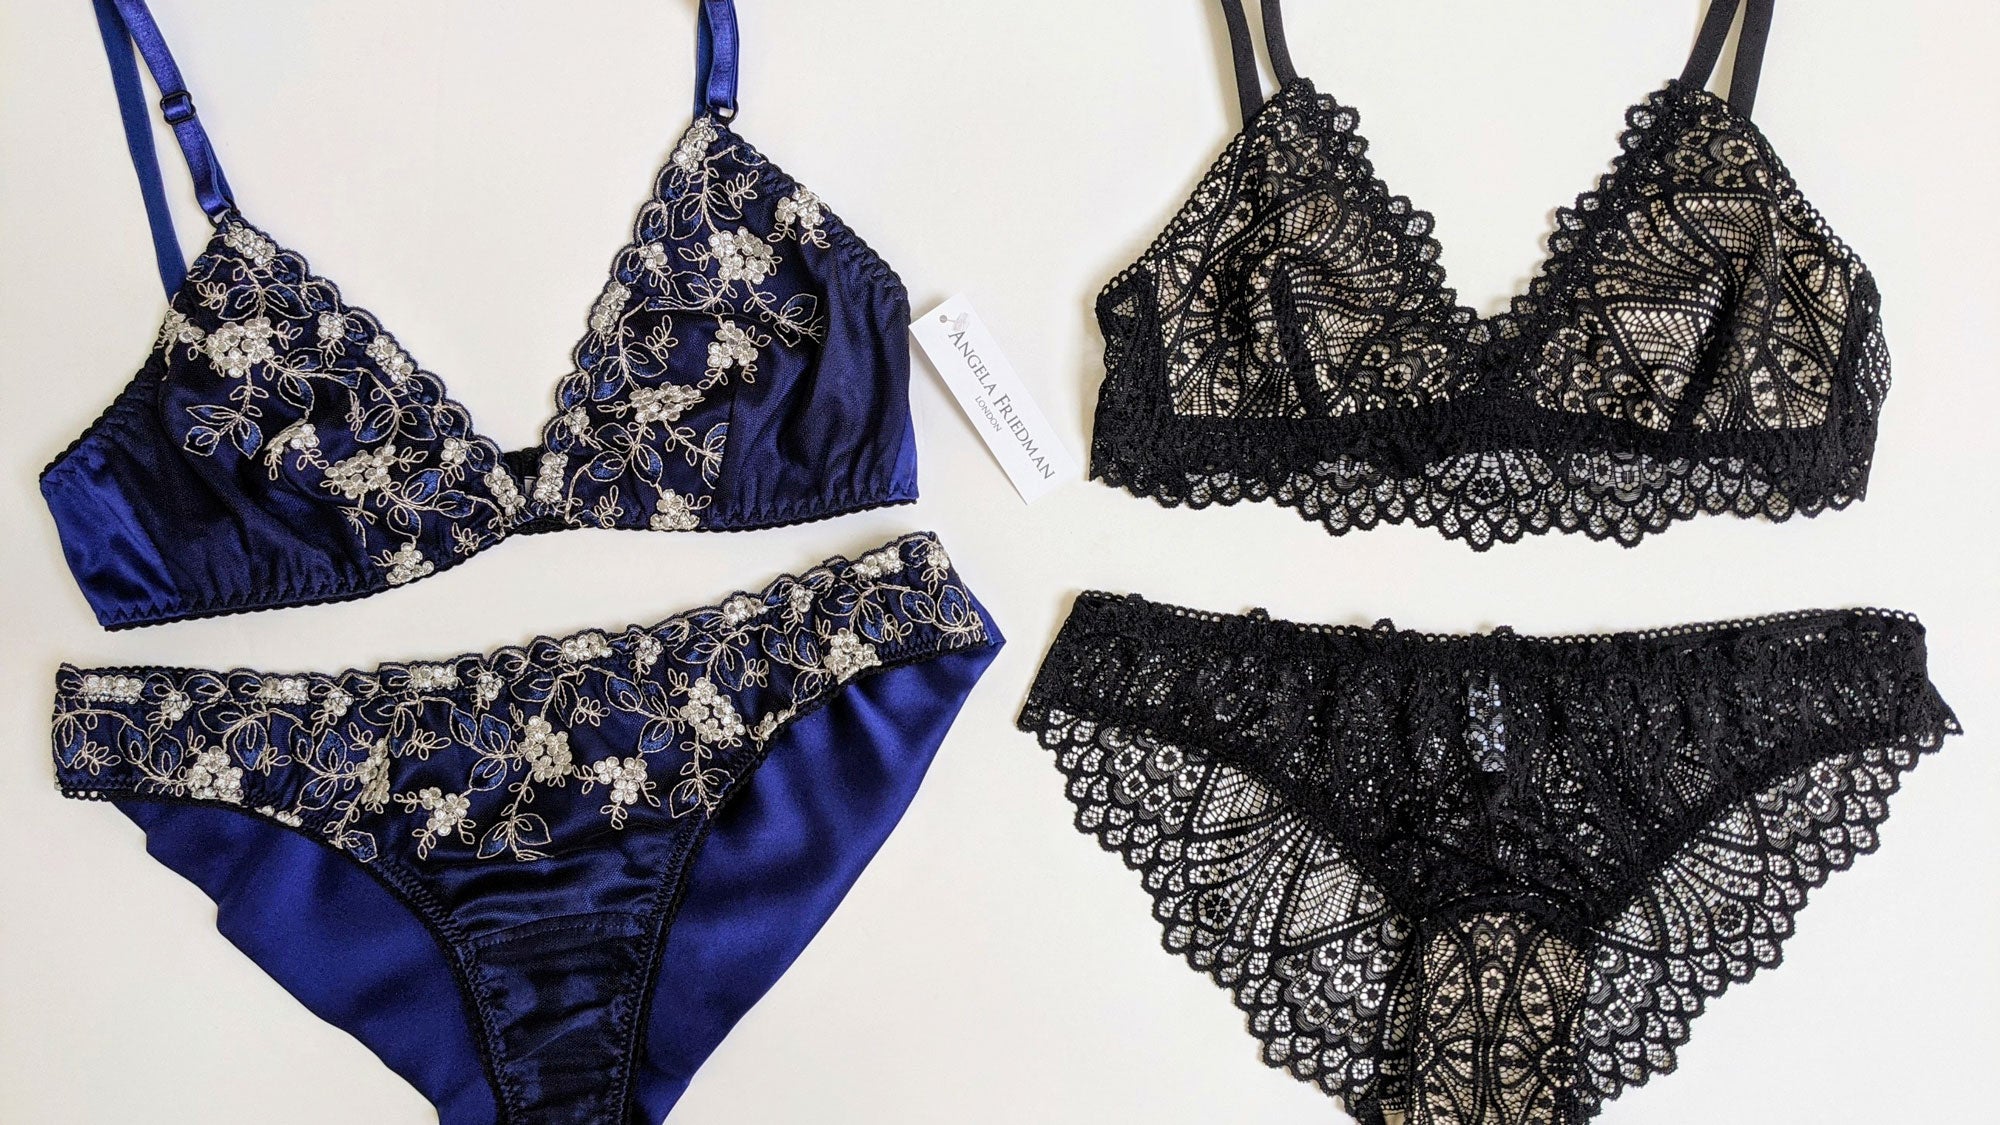 What Does Wearing Matching Underwear Sets Vs. Mismatched Symbolize? -  Readability